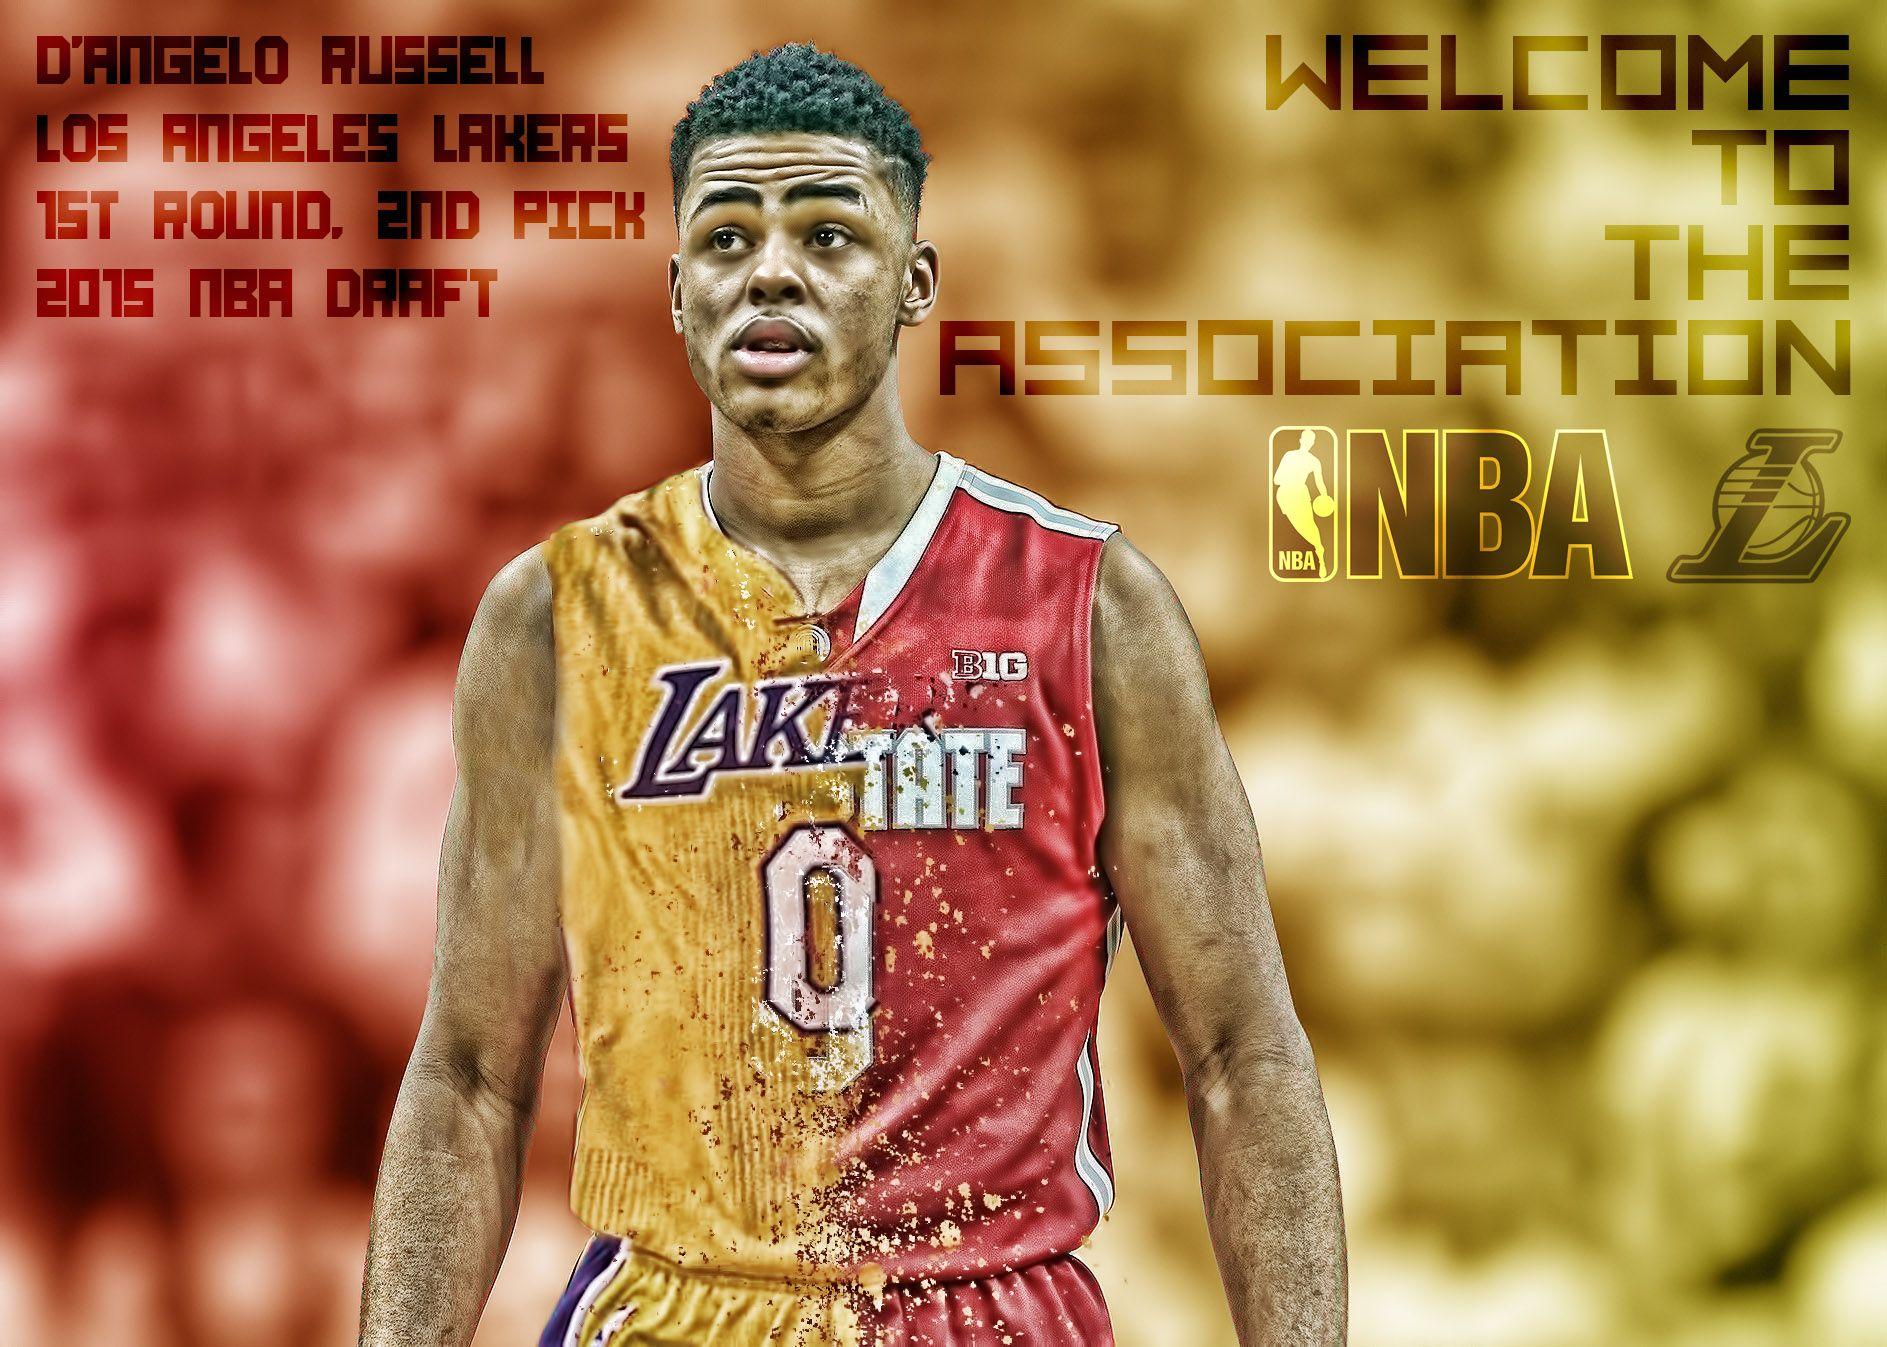 Awesome D Angelo Russell Wallpaper